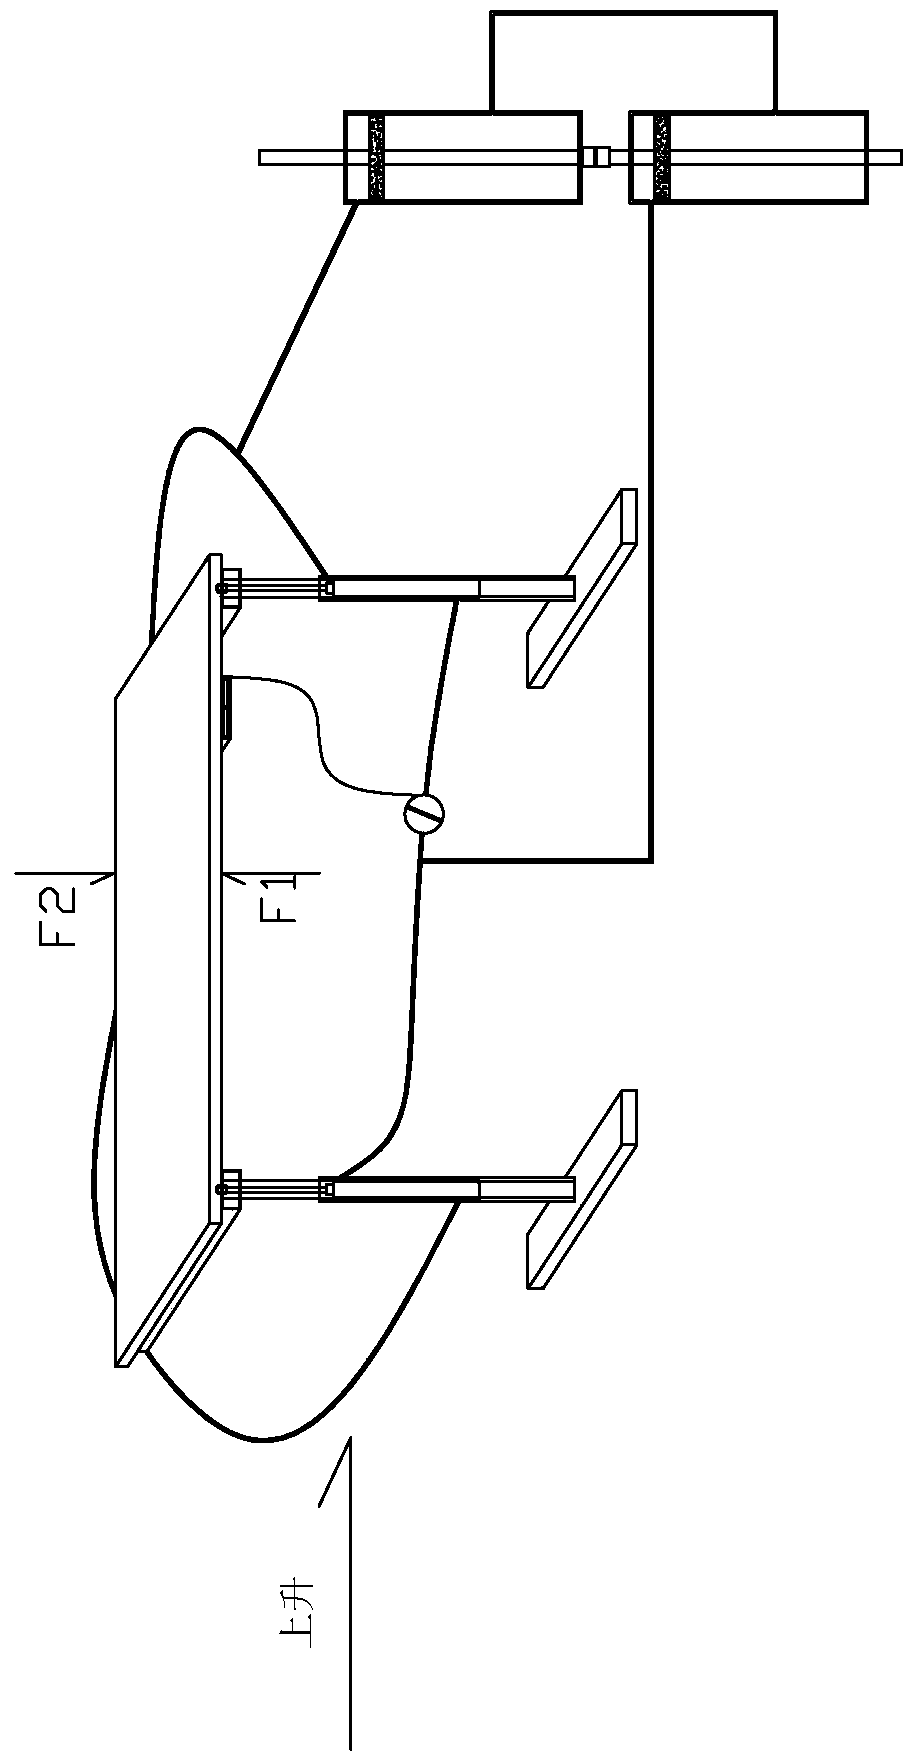 External air reservoir or tank linkage synchronous lifting table based on principle of gas spring